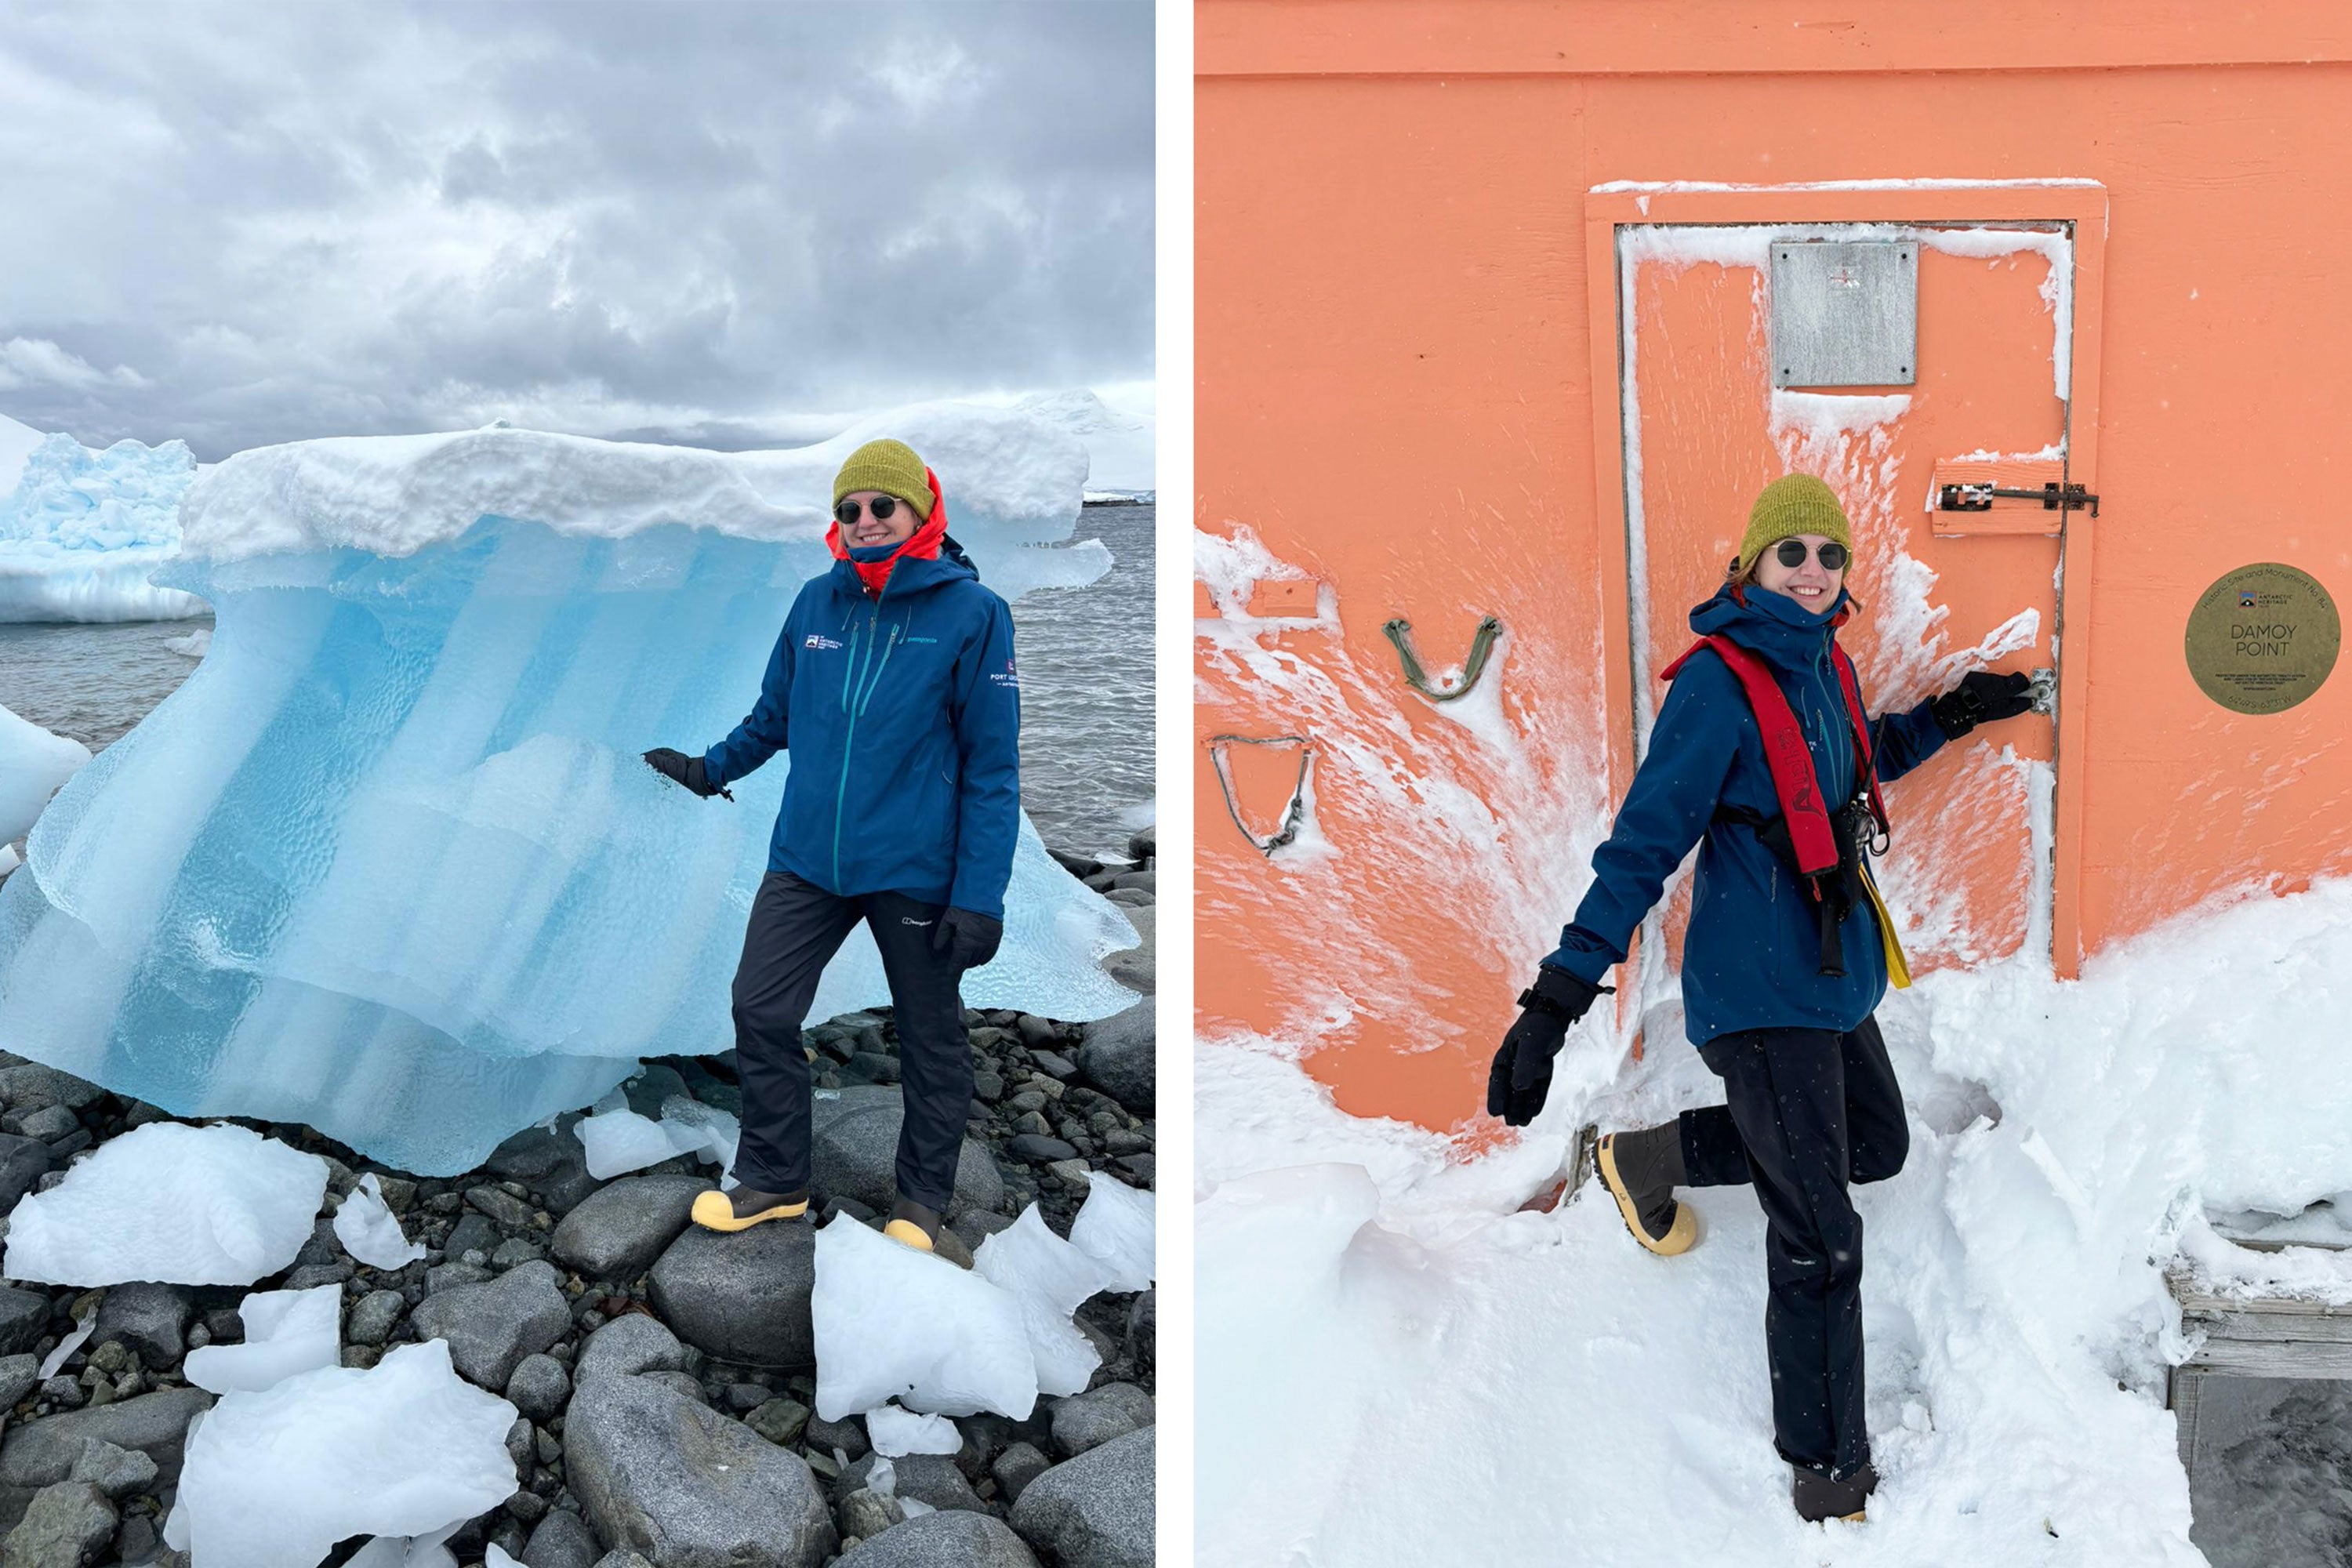 Two images of people wearing sunglasses and warm weather clothing, including a beanie hat, gloves and pair of Xtratuf boots. On the left the person is stood on rocks, in front of a small iceberg and on the right they are stood on snow, in front of a peach coloured door